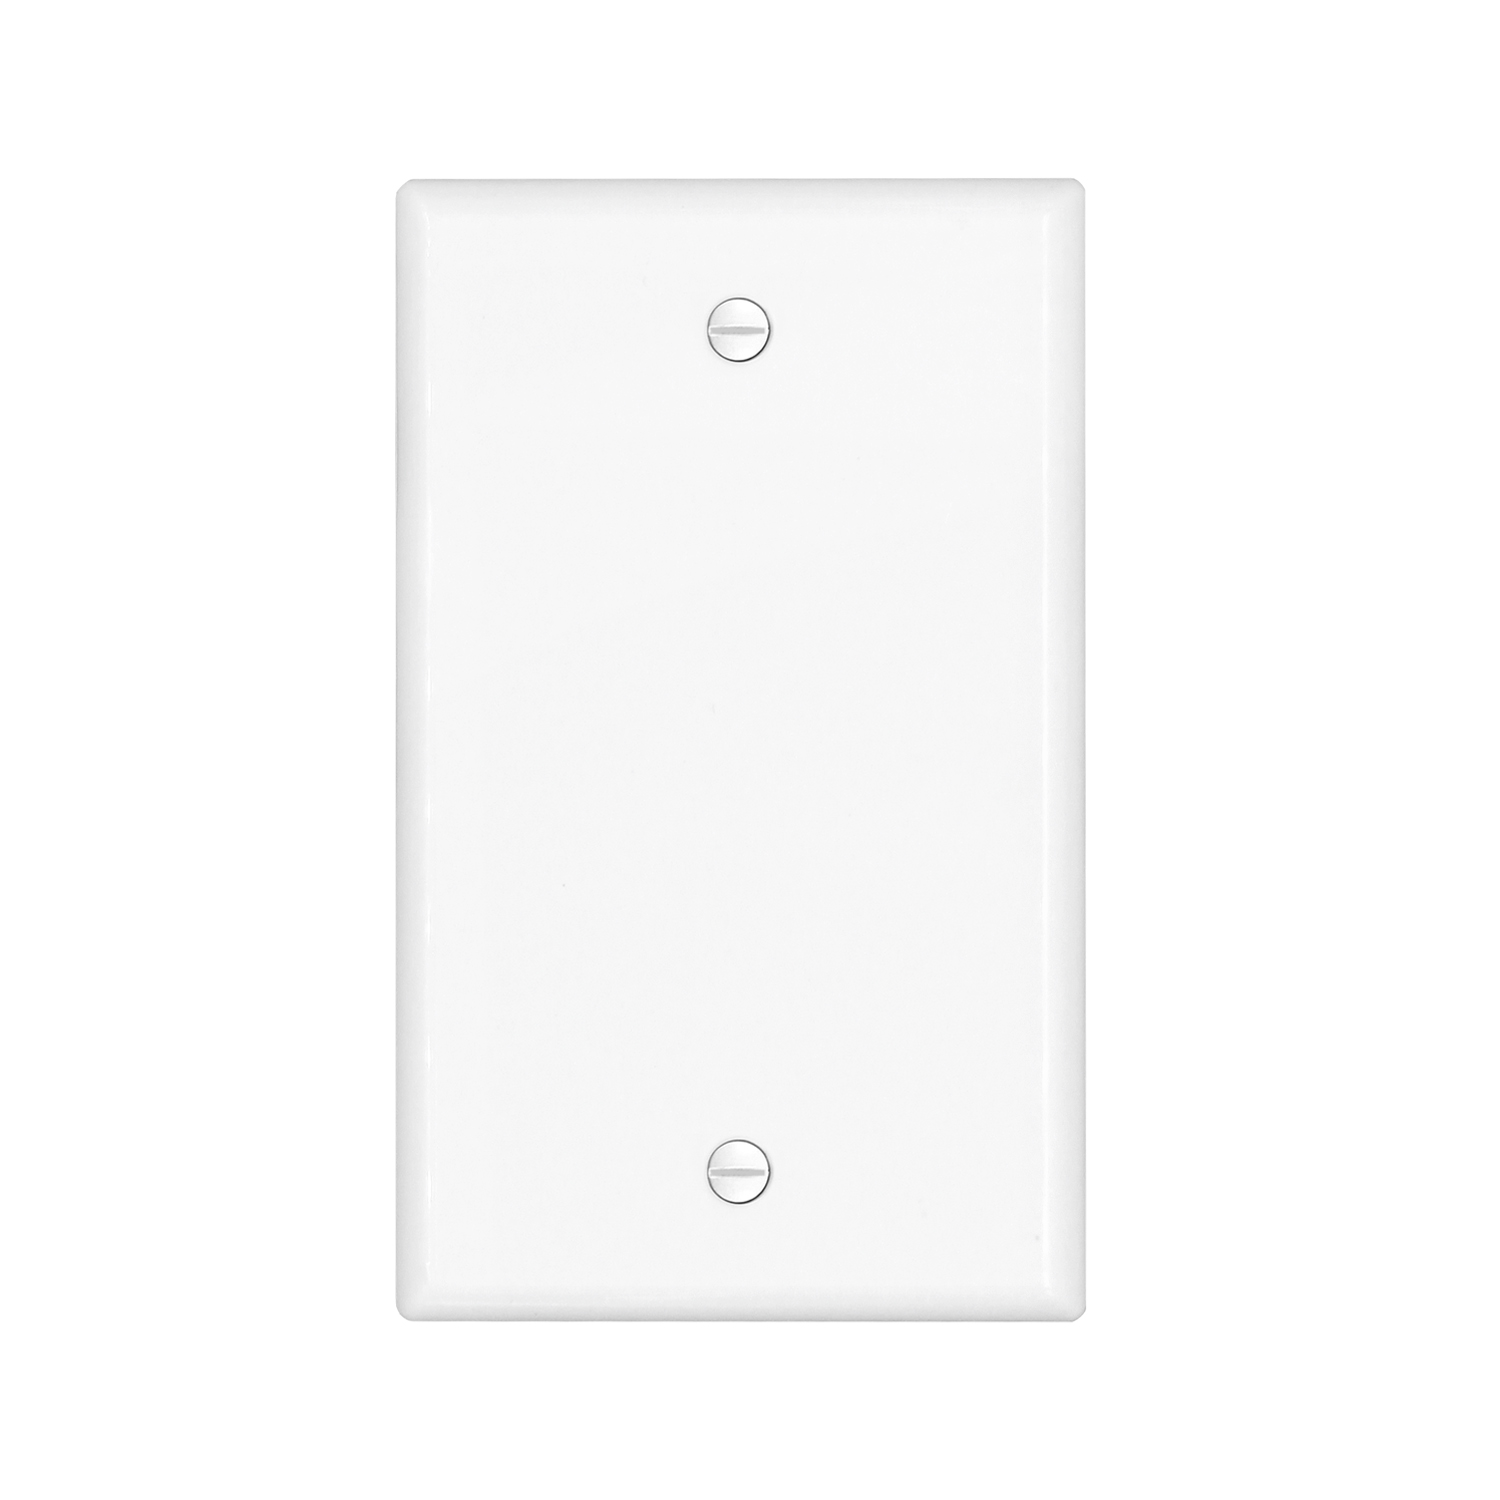 UL Listed Polycarbonate Thermoplastic 1-Gang Standert grutte Blank Outlet Cover